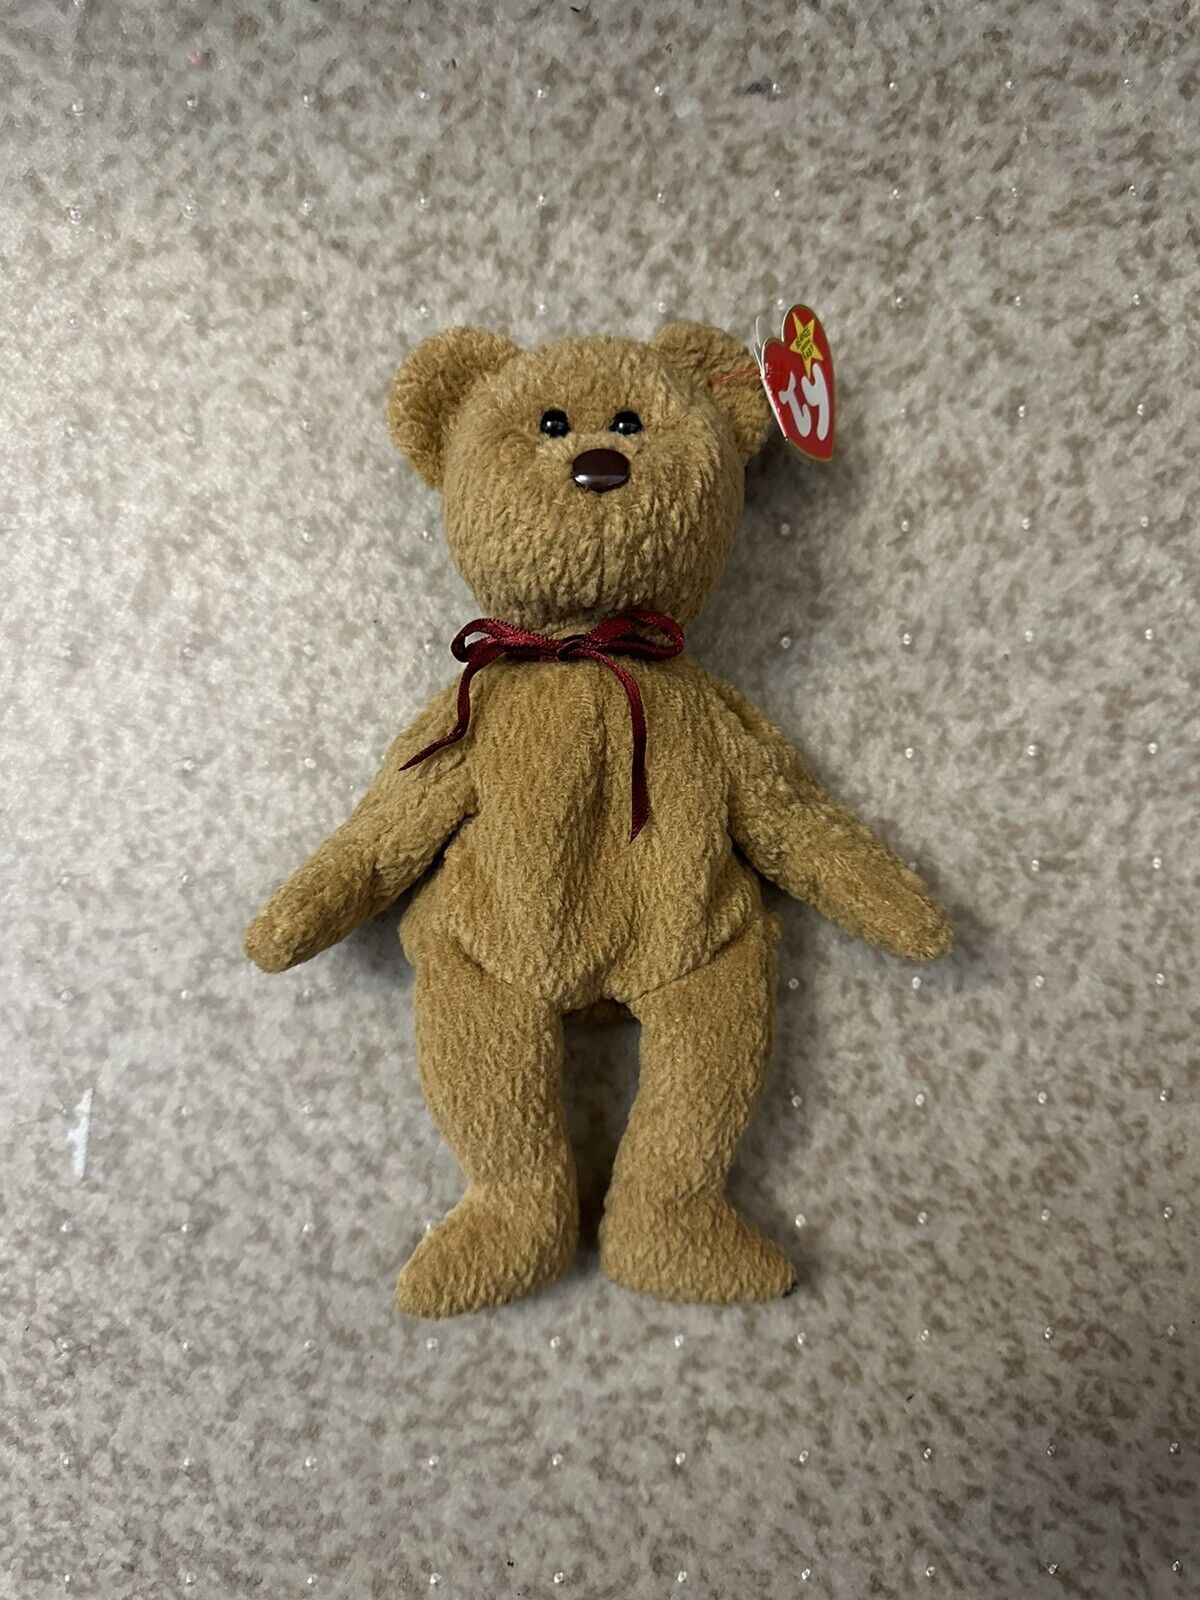 1993 1996 Retired Curly The Teddy Bear Ty Beanie Baby Plush Collectible